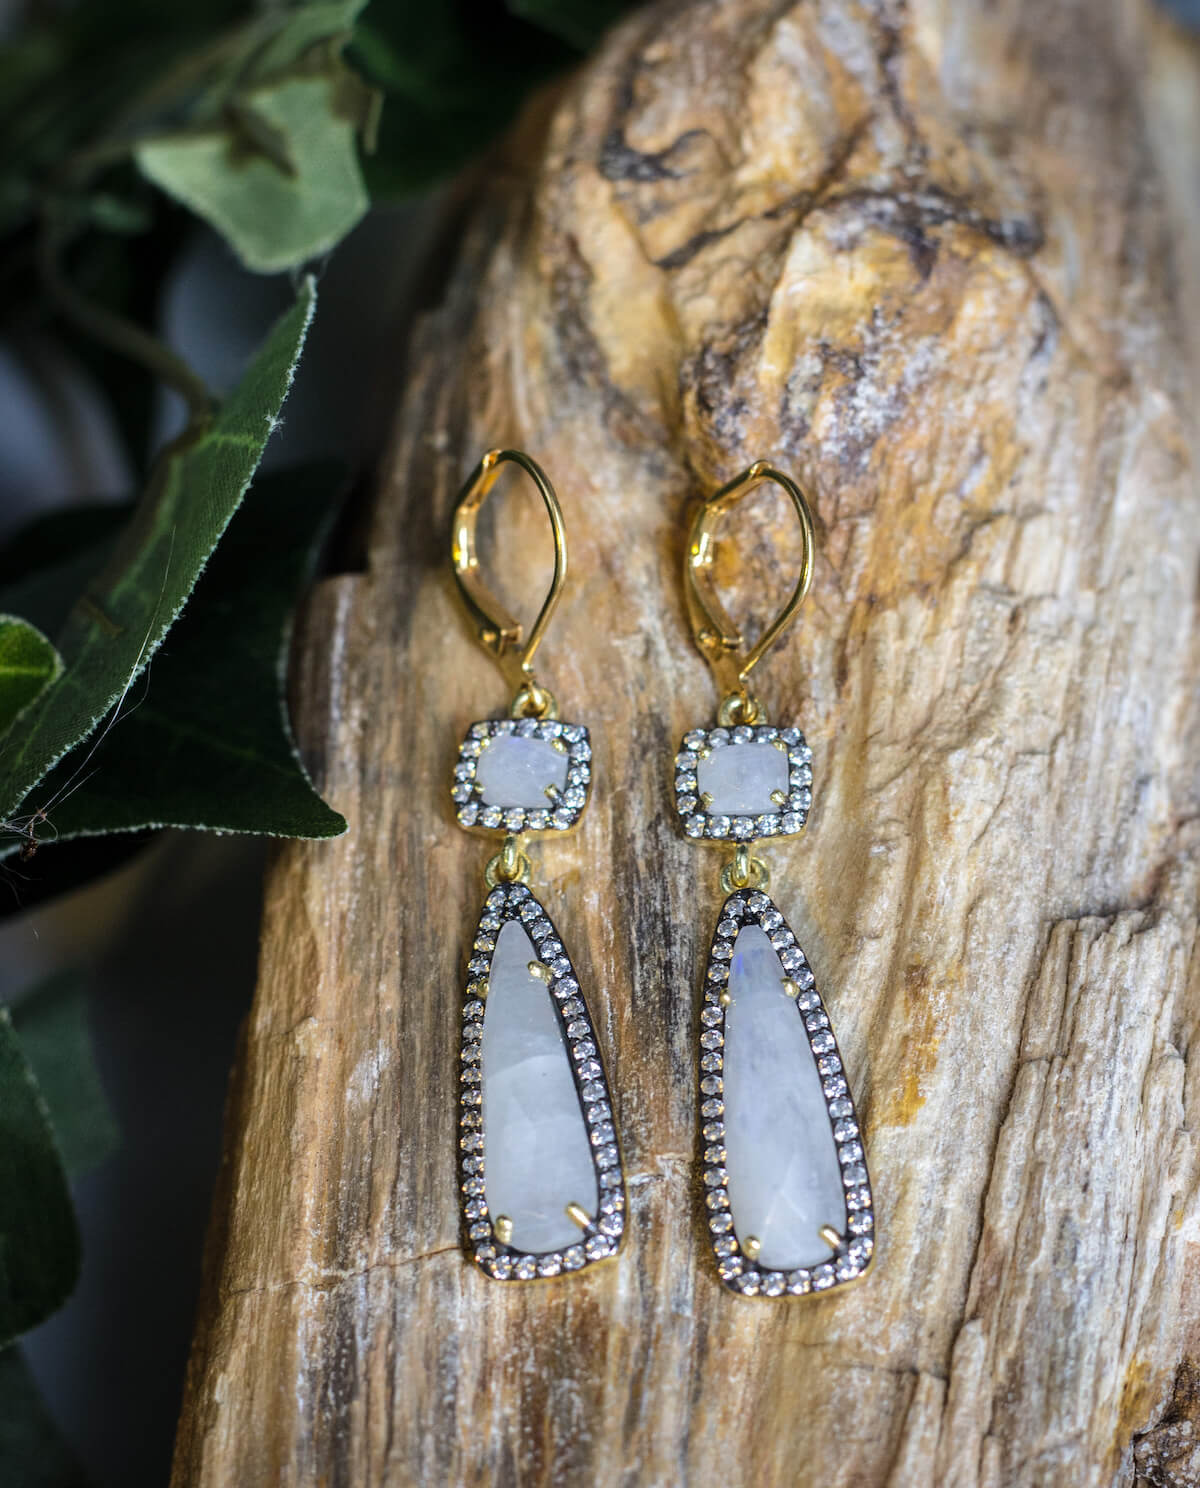 Gem and crystal earrings in gold from Rachel Reinhardt Jewelry.